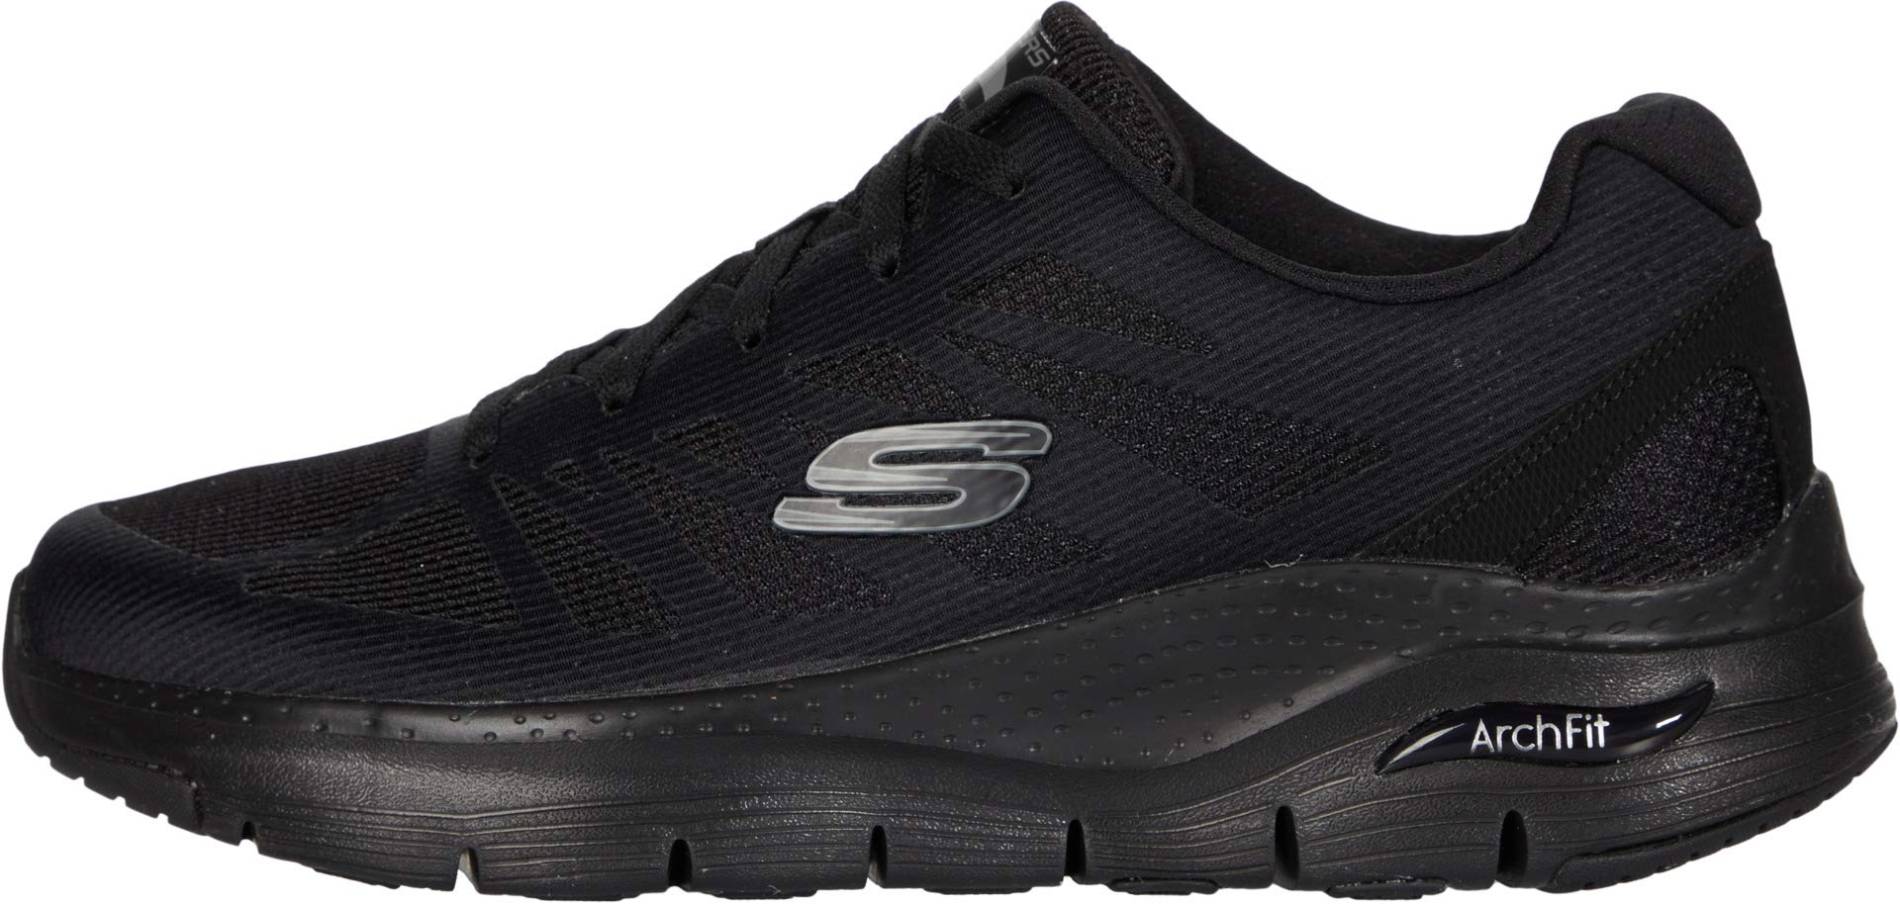 Skechers Arch Fit - Charge Back Review 2022, Facts, Deals ($63 